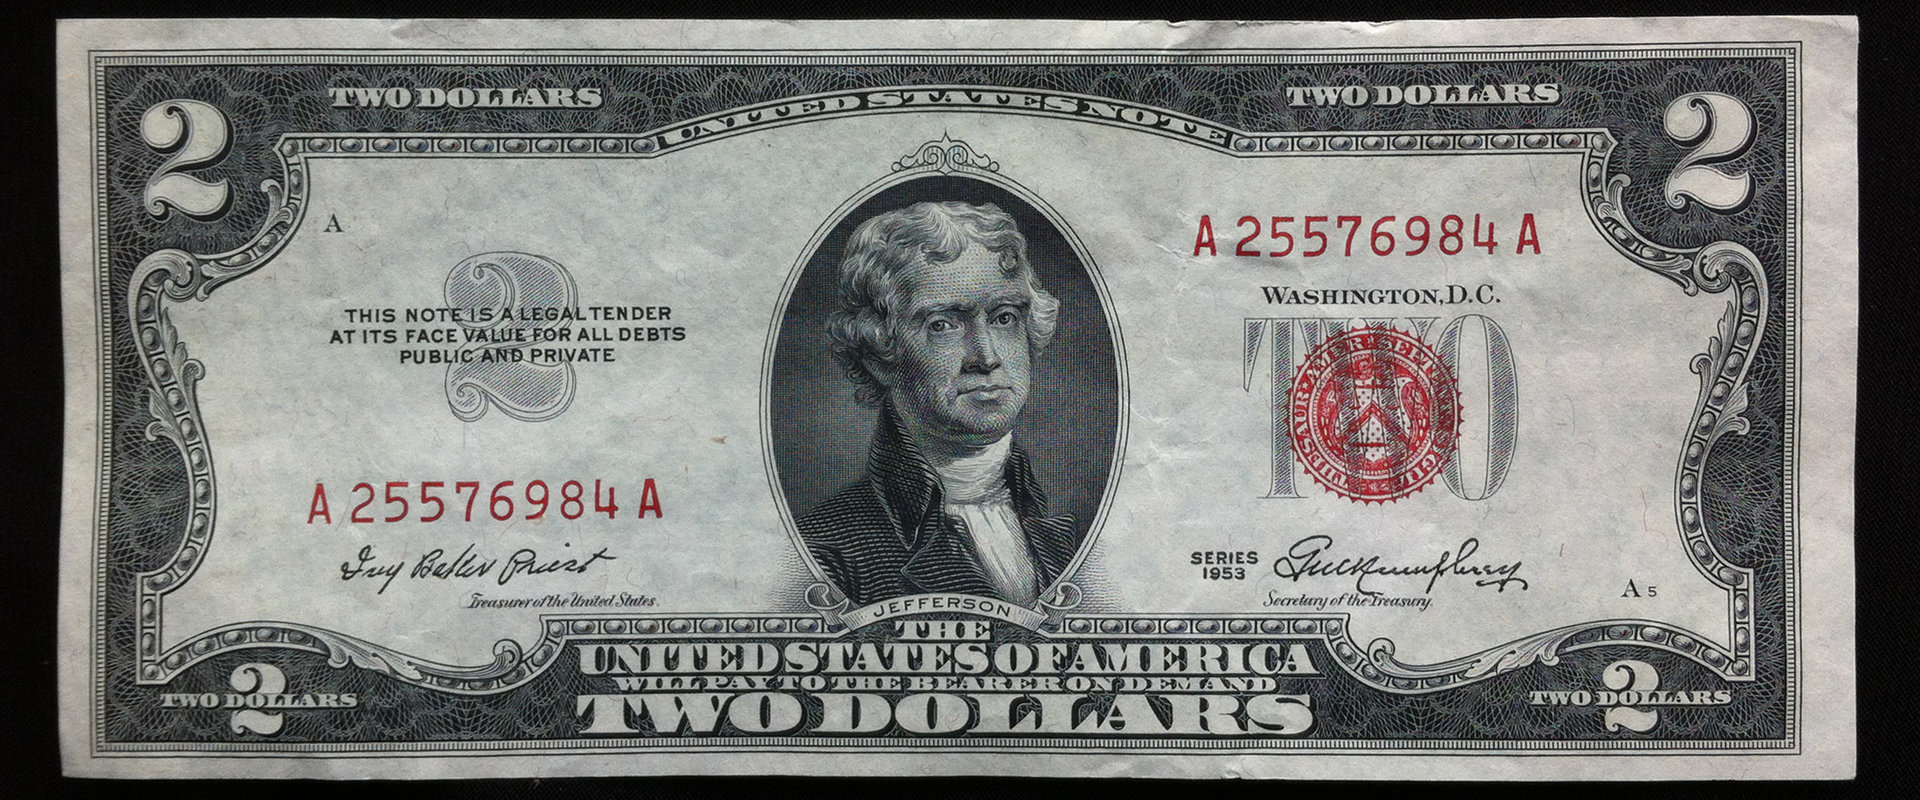 2-Dollar-Red-Seal-1953 Front.jpg